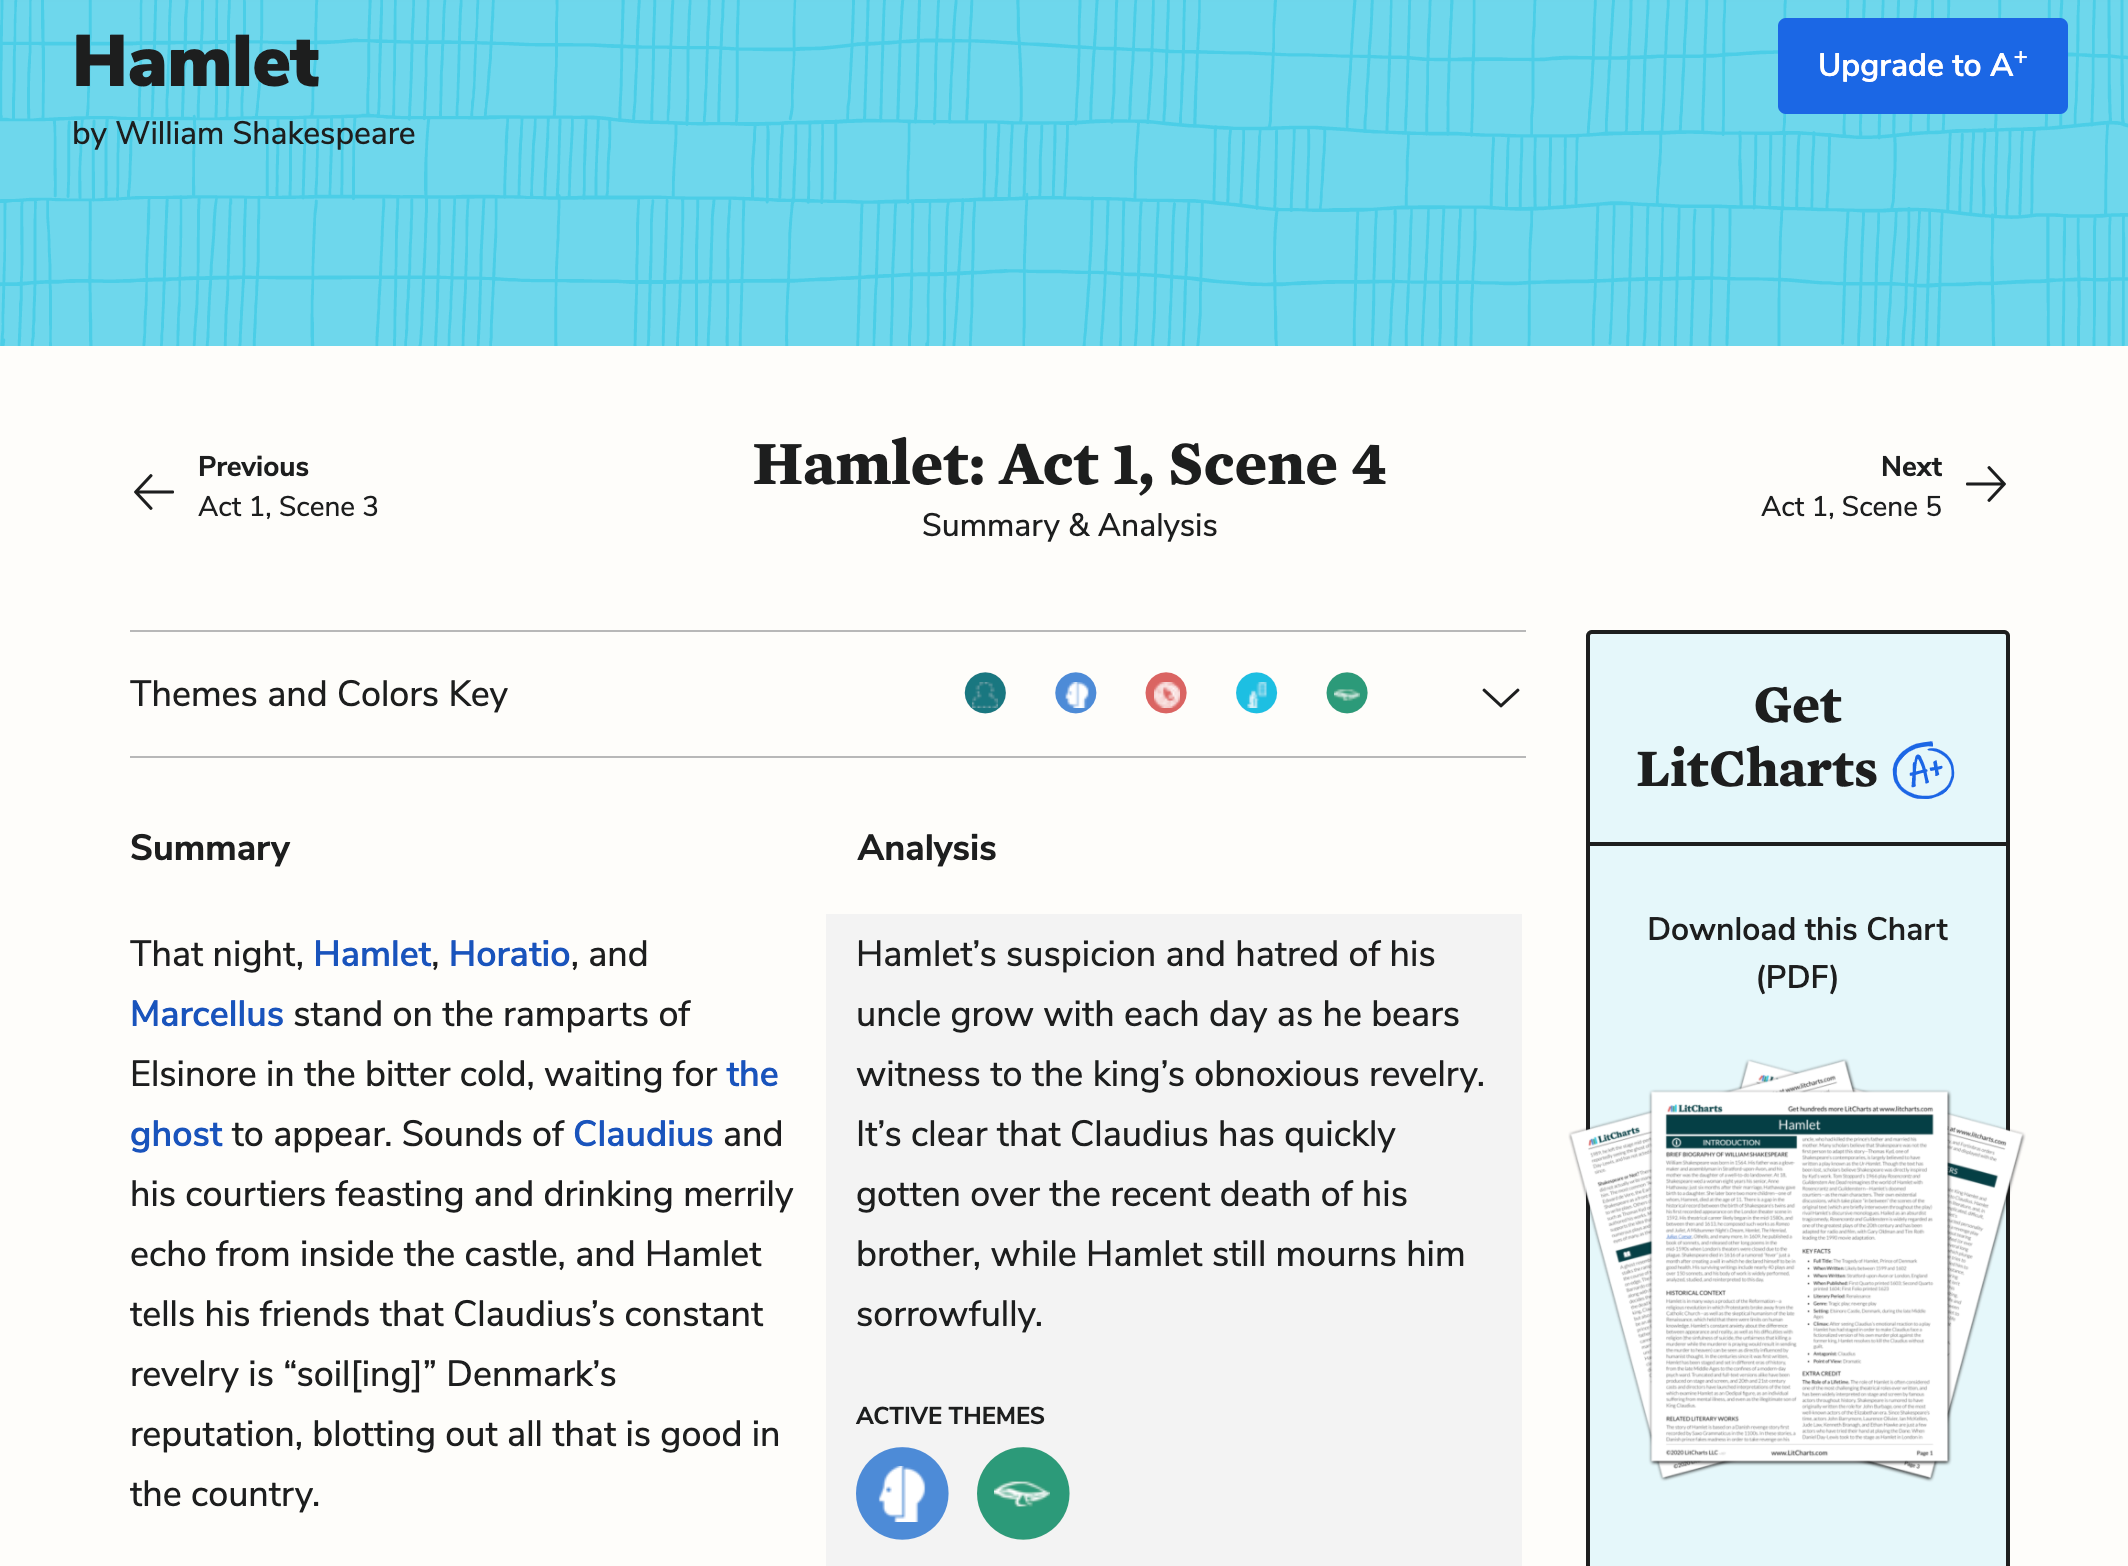 A screenshot of the LitCharts website, showing an analysis of Hamlet